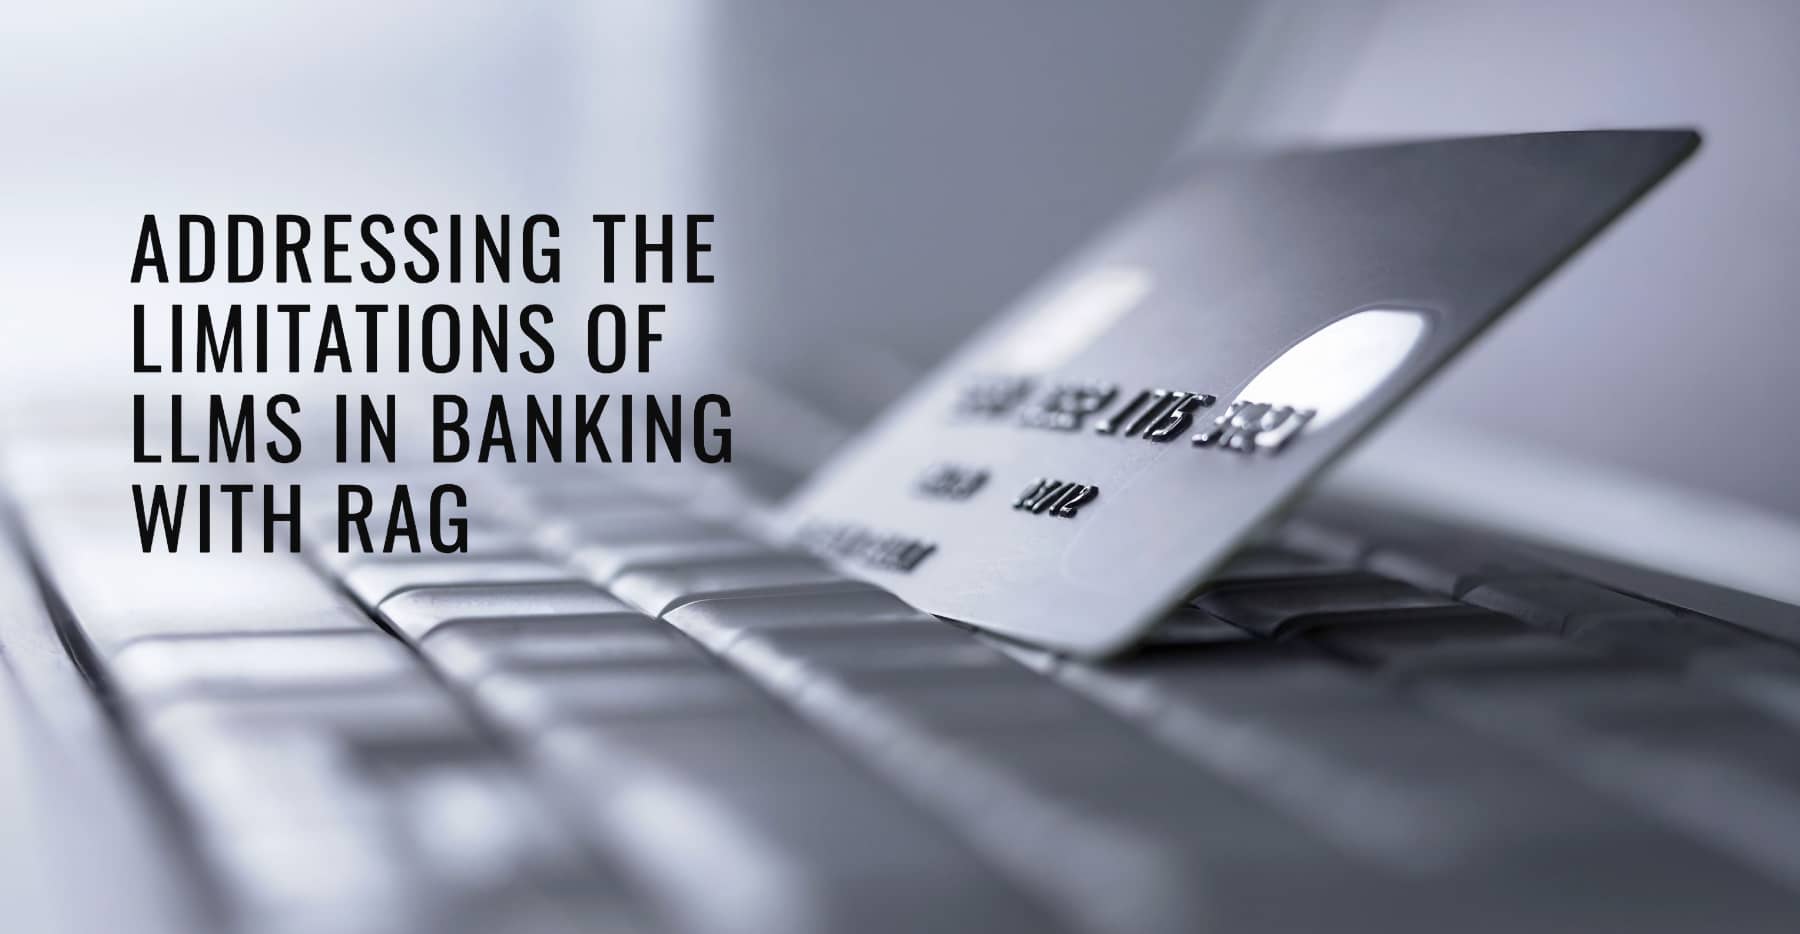 Addressing the Limitations of LLMs in Banking with RAG